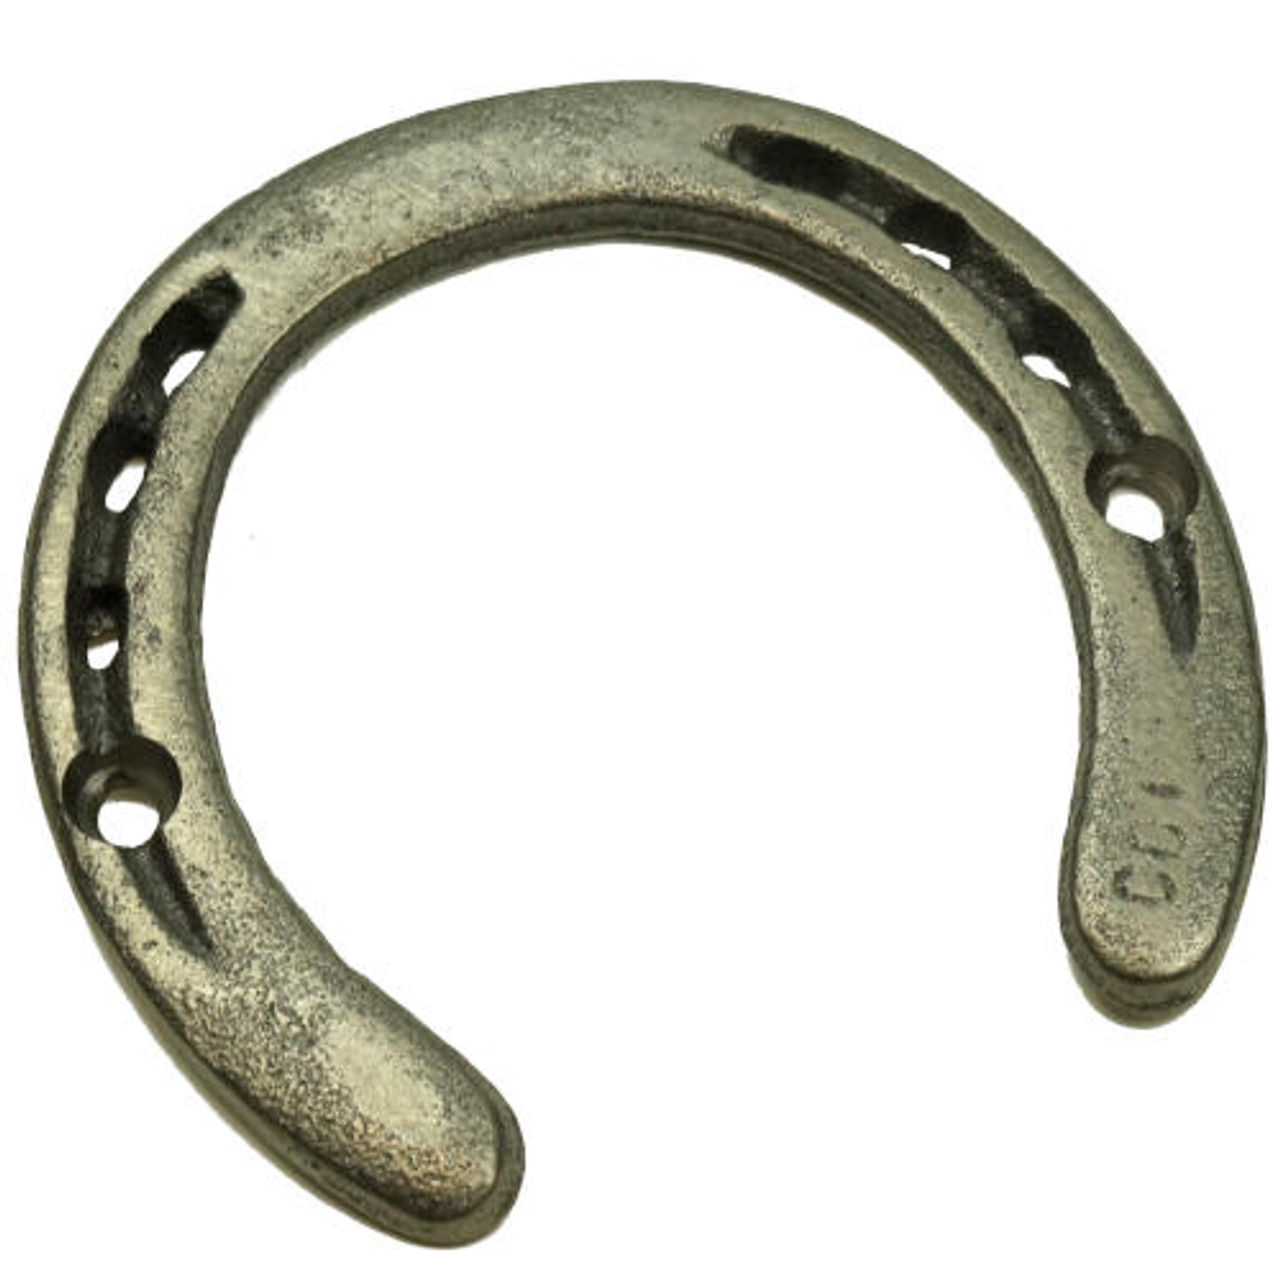 4 Large Horse Shoes Rustic Cast Iron 5 tall x 4 3/4wide (Set of 4) 05208